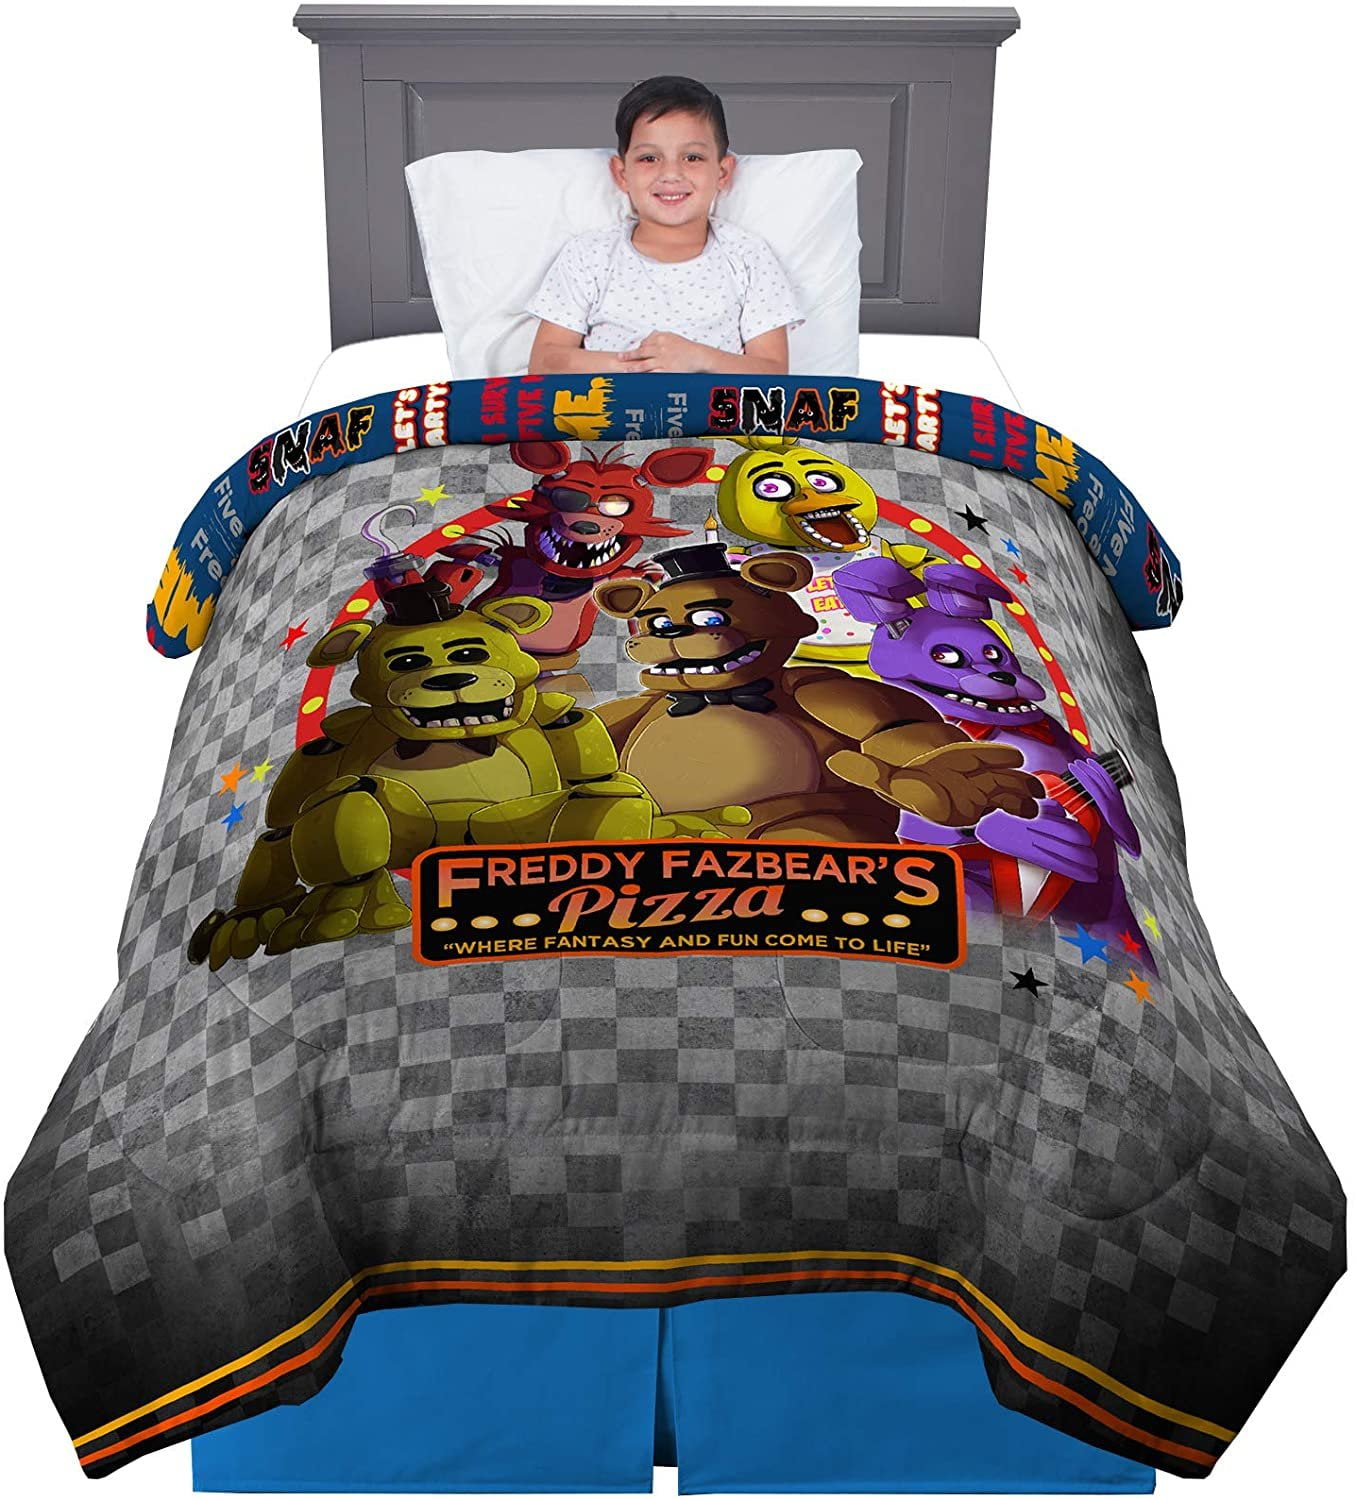 Product name is Franco Kids Bedding Comforter and Sheet Set, 5 Piece Full  Size, Five Nights at Freddy's : r/CrappyDesign